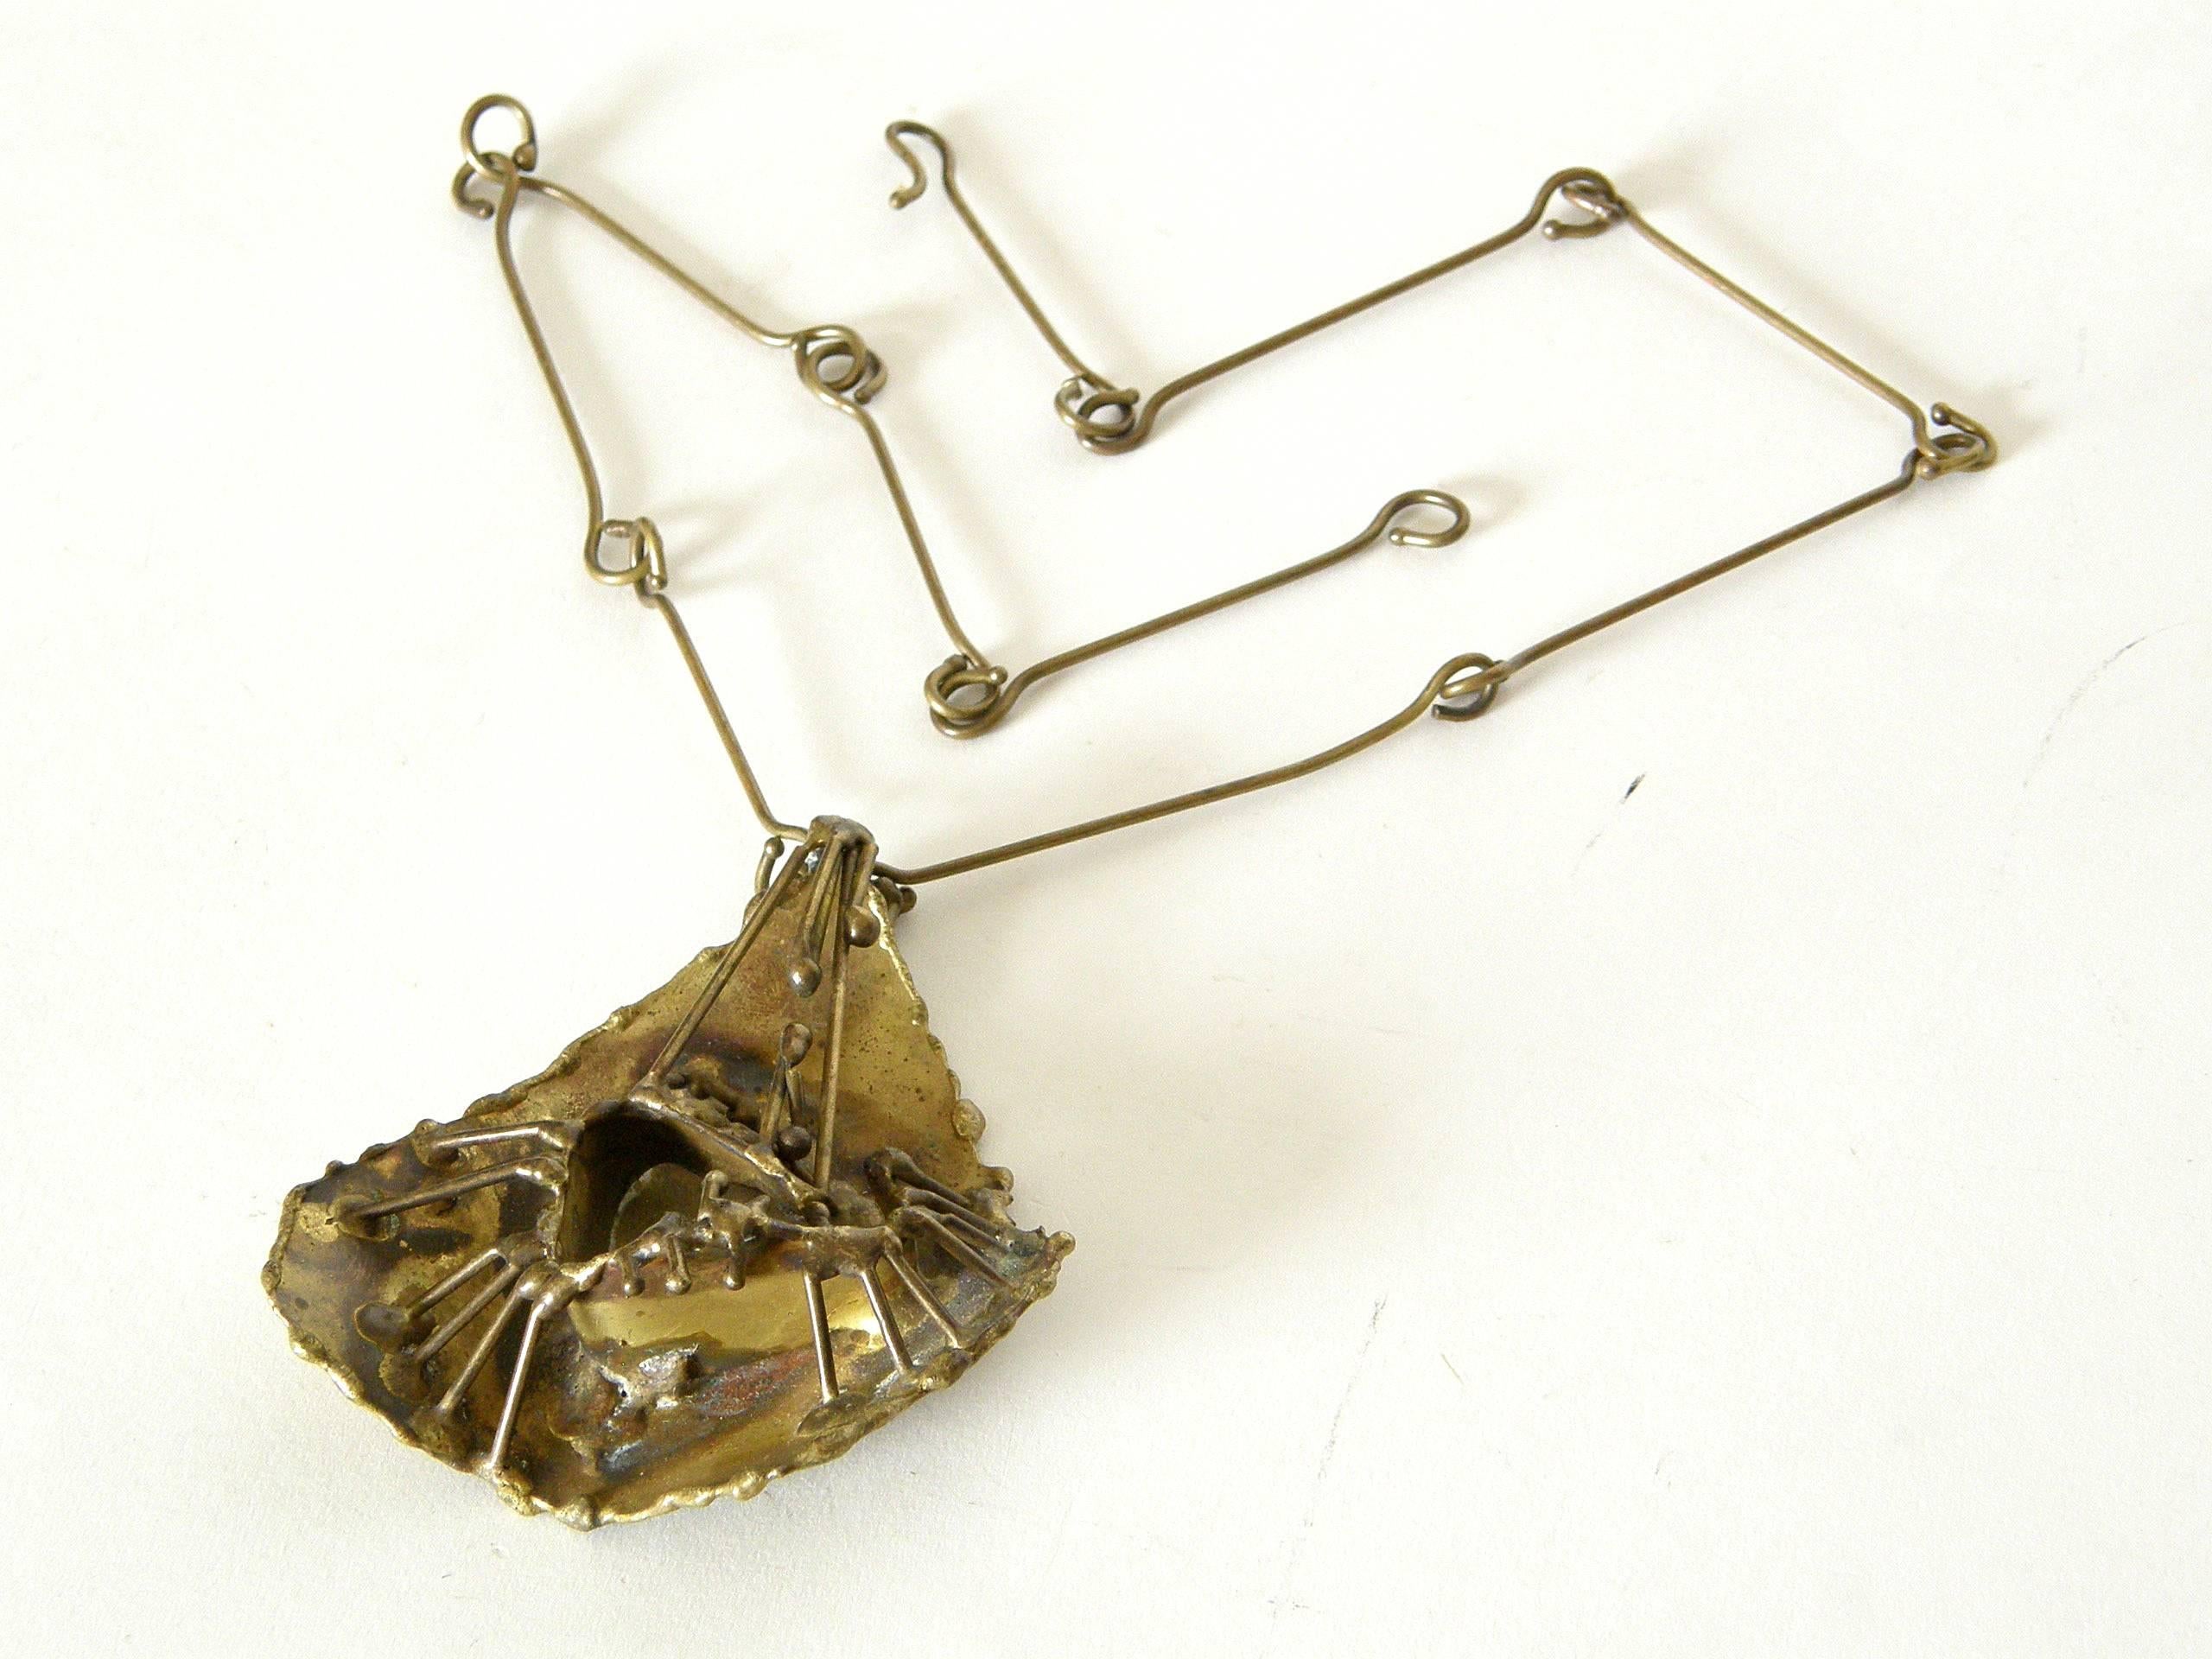 This hand wrought brass necklace features an abstract pendant constructed in fairly high relief for the scale. It has torch cut edges, accents of oxidation, and a kind of architectural, weblike structure. It hangs from a chain of long, wire links.